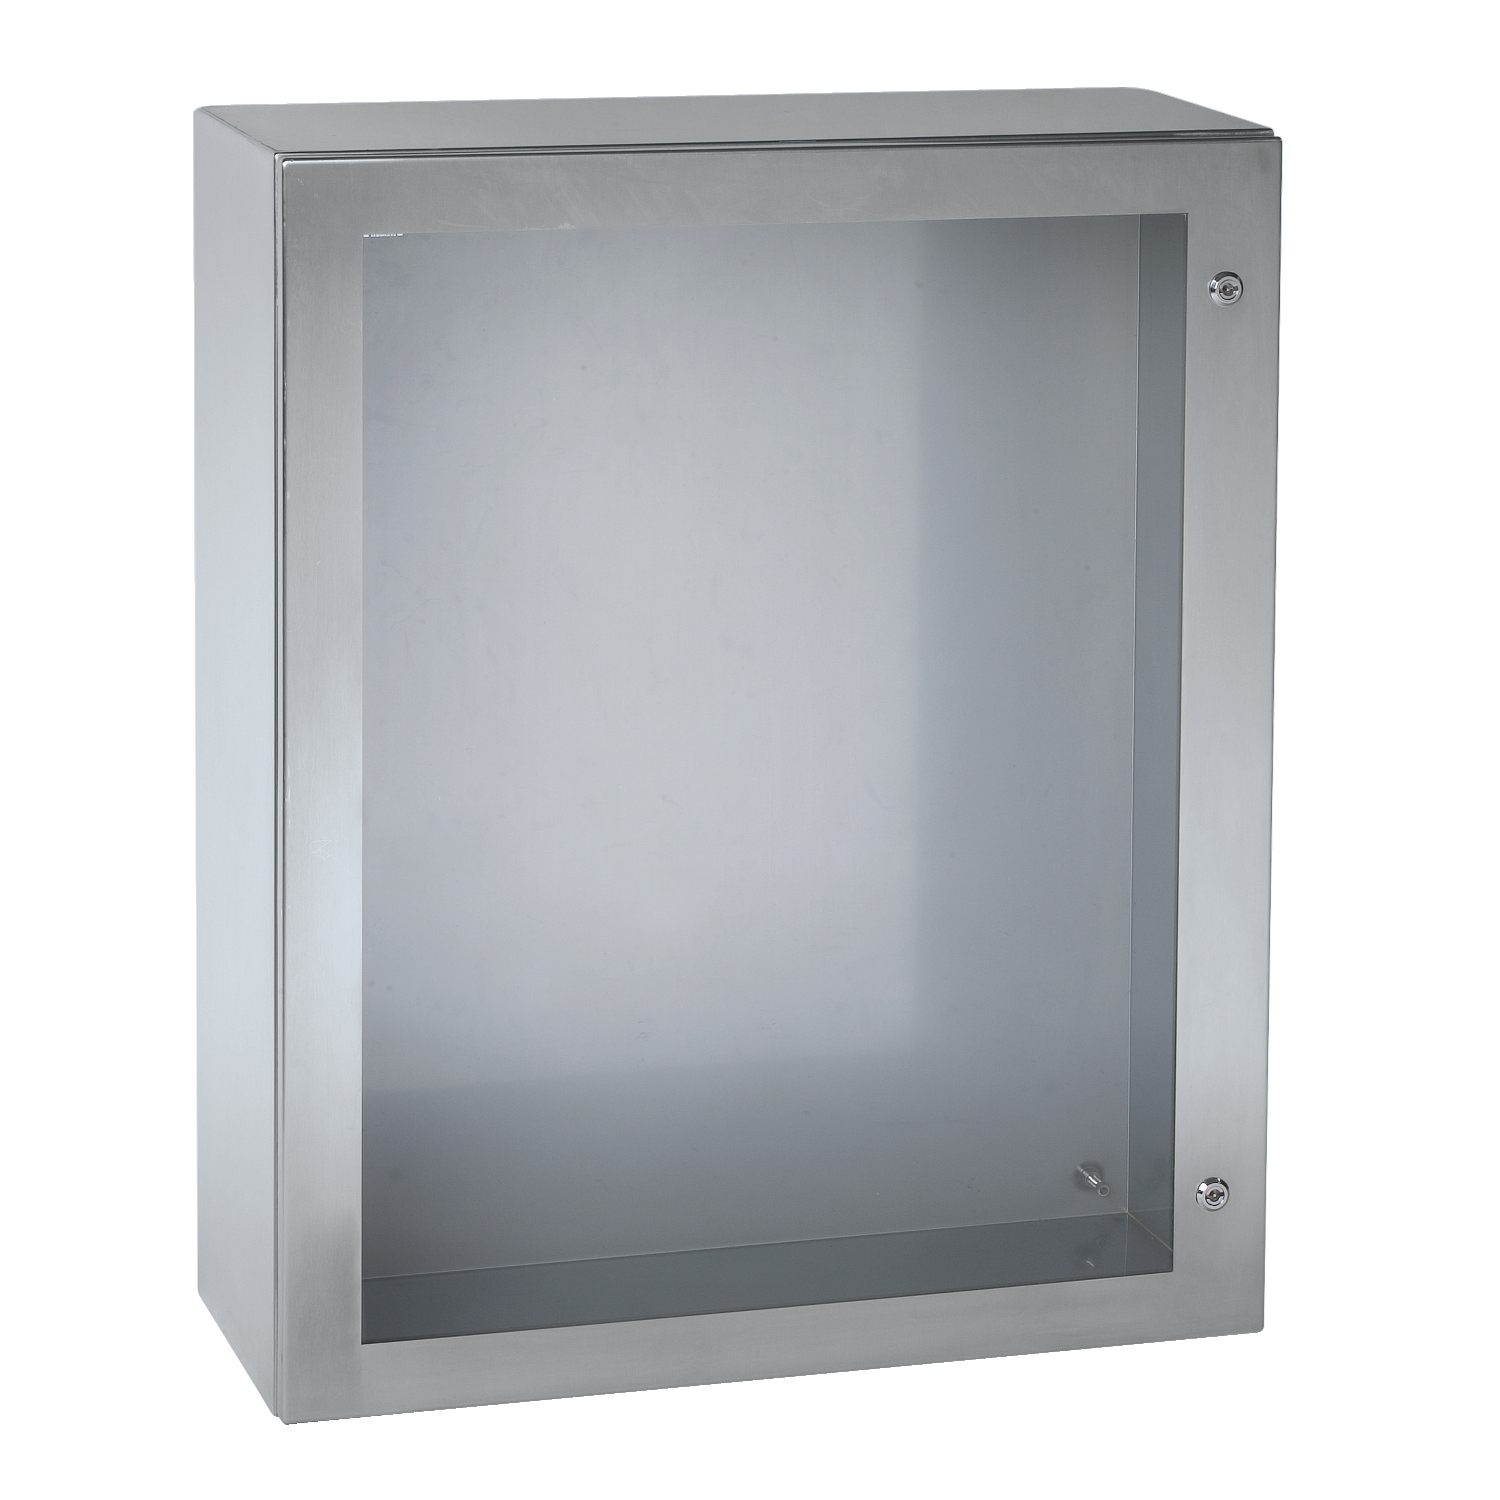 Wall mounted enclosure, Spacial S3X, stainless steel 304L, glazed door, 400x300x200mm, IP66